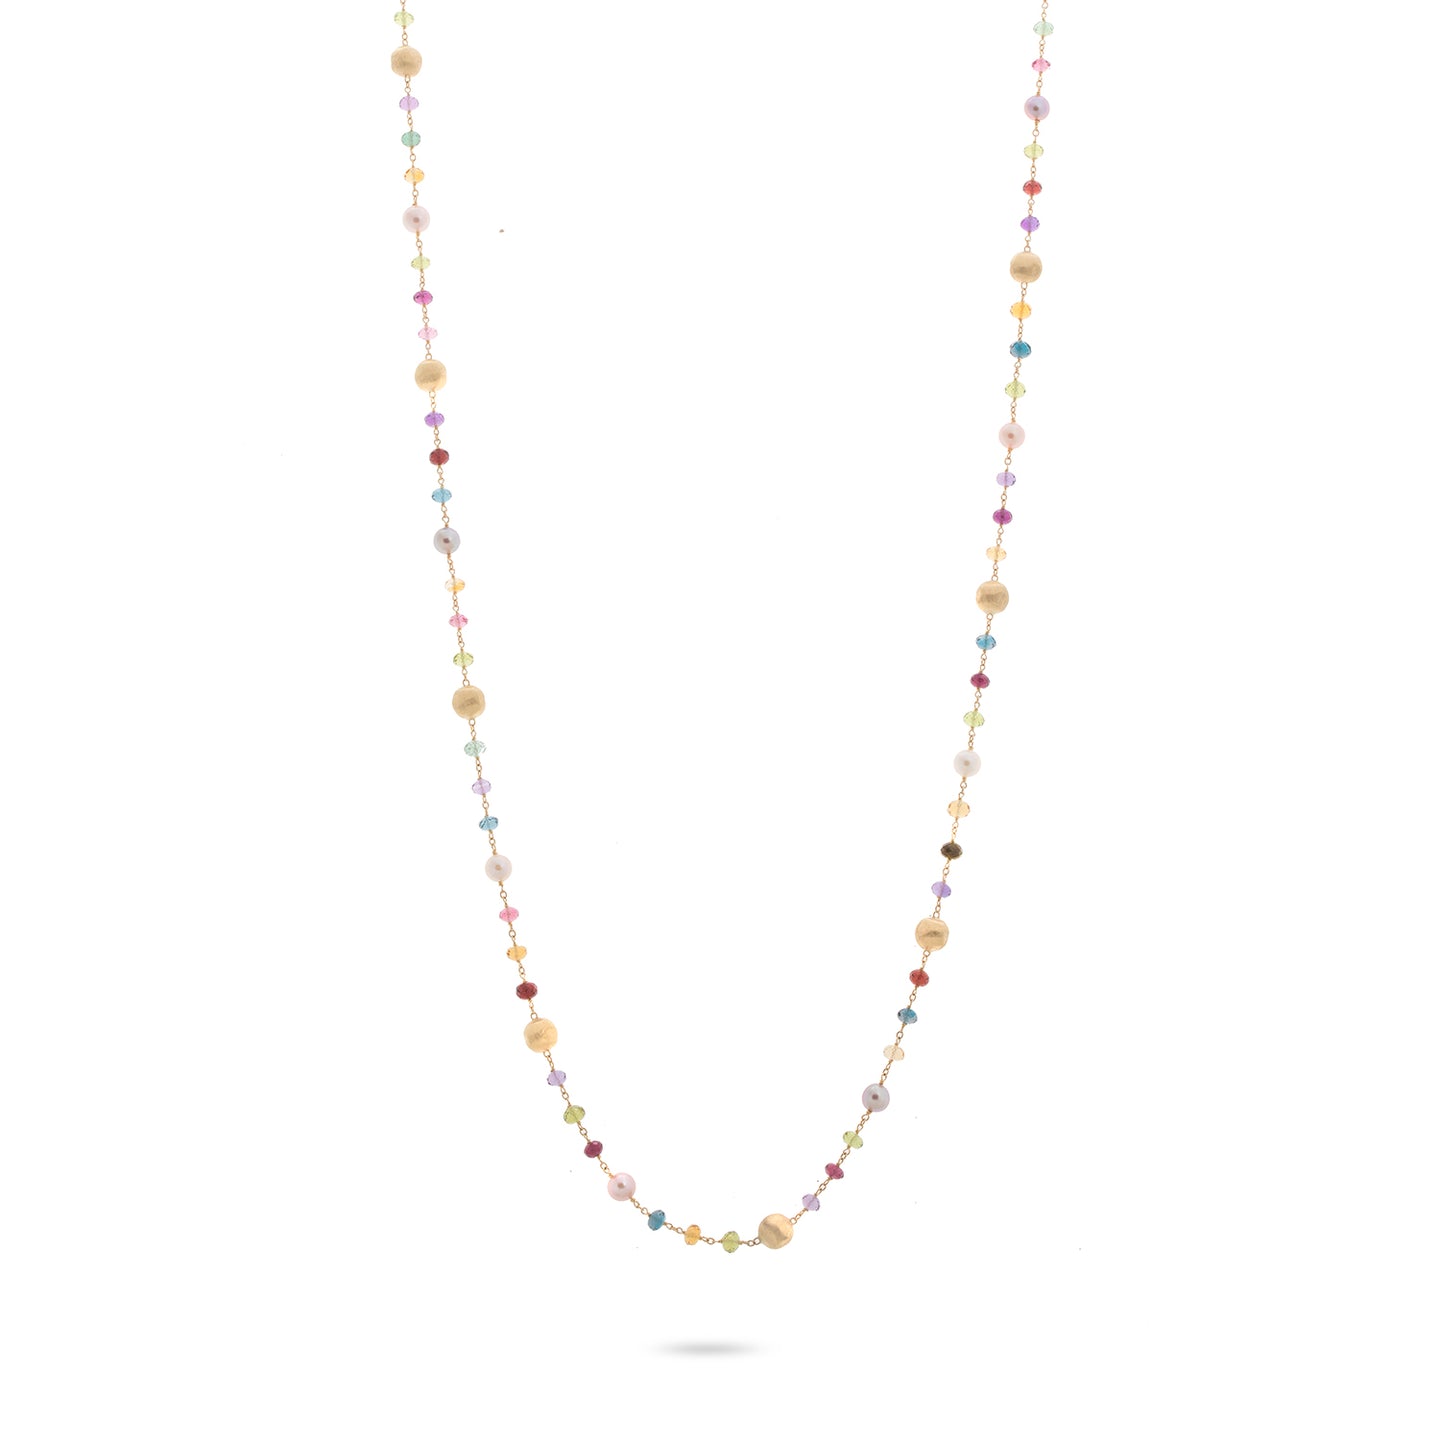 Marco Bicego Africa 18K Yellow Gold Mixed Gemstone and Freshwater Pearl Sautoir Necklace